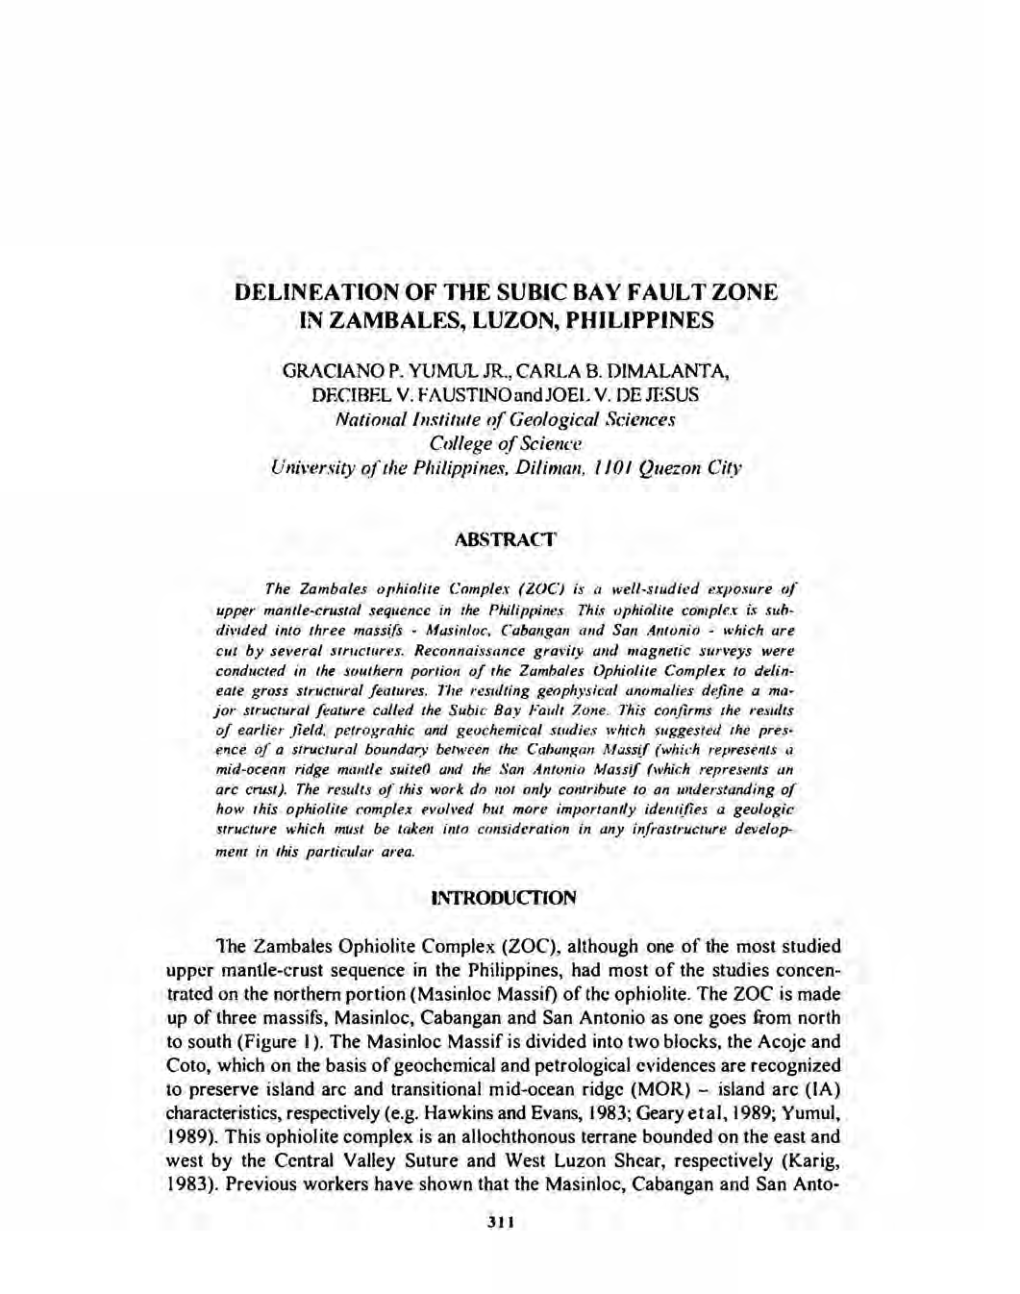 Delineation of the Subic Bay Fault Zone in Zambales, Luzon, Philippines